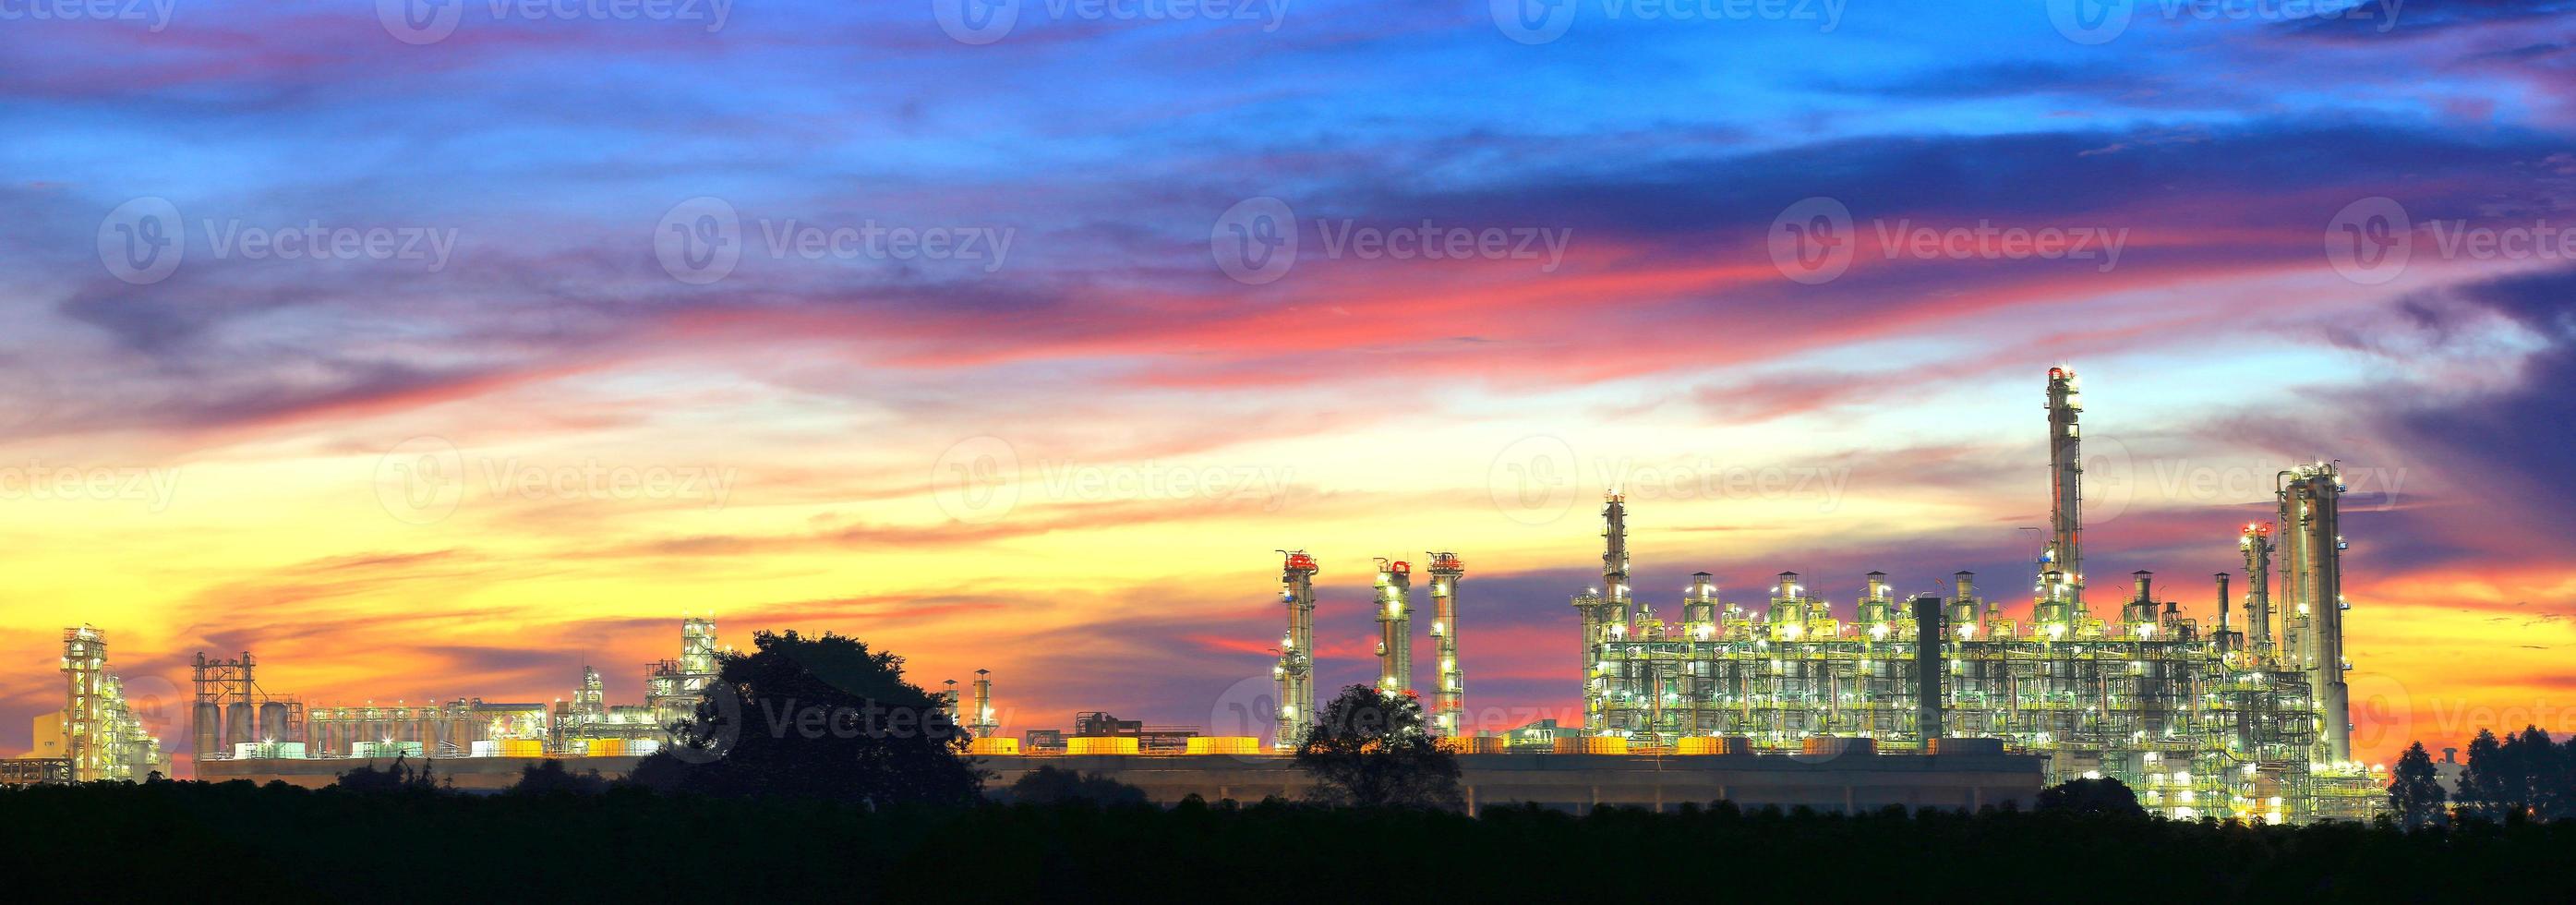 Landcsape of petrochemical oil refinery plant at night photo